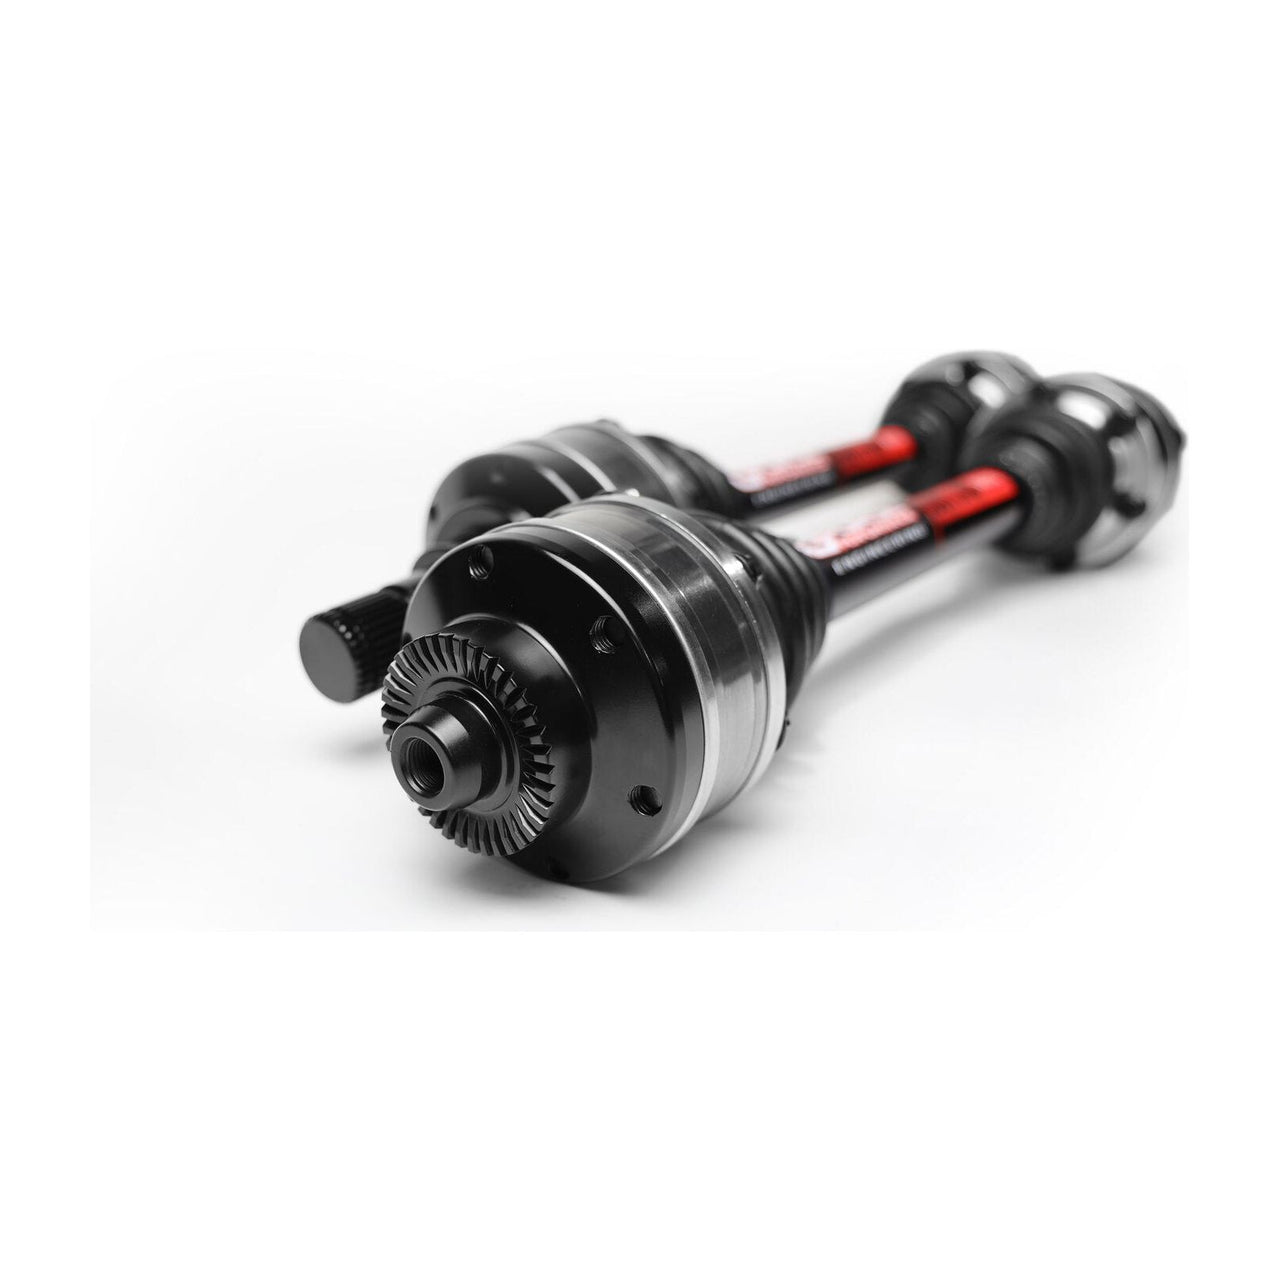 G-FORCE PERFORMANCE A90/91 MK5 SUPRA OUTLAW AXLE SET